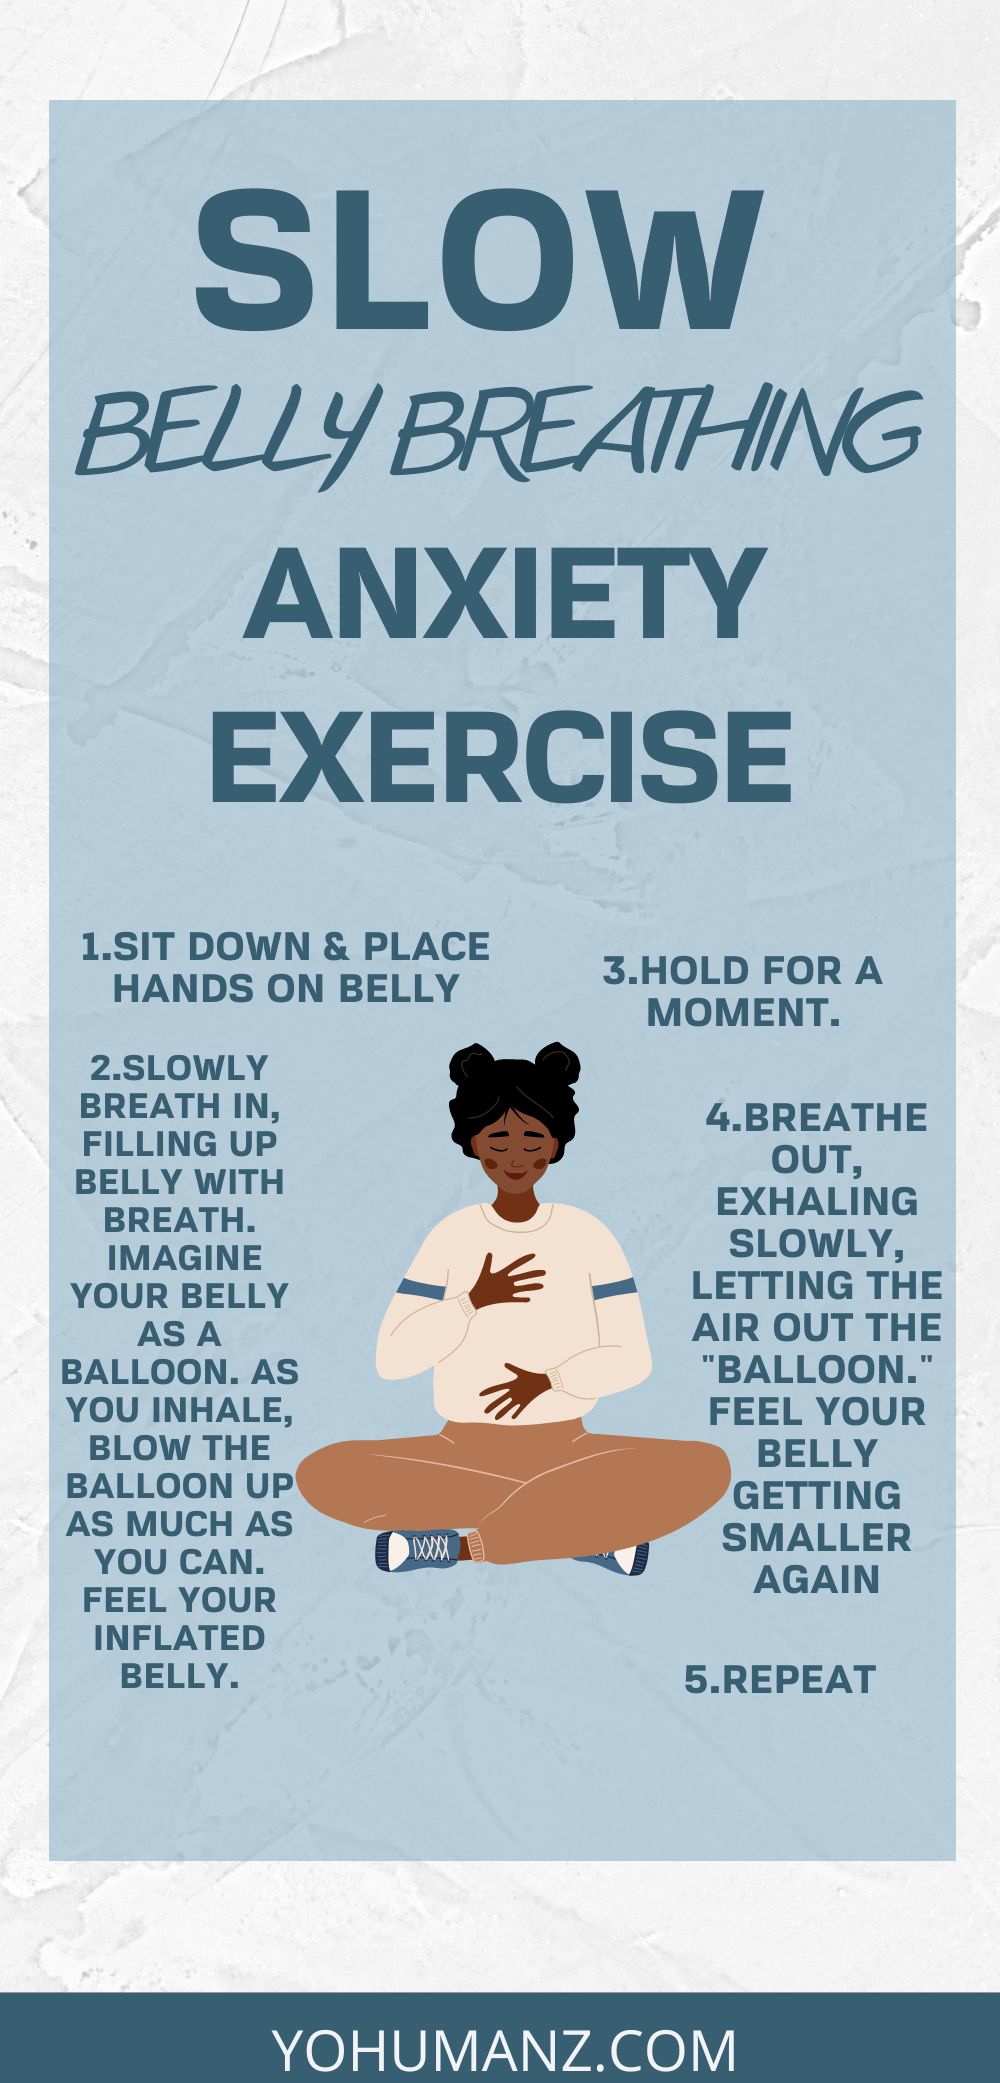 Effective Anxiety Exercises, Relieve Anxiety Help